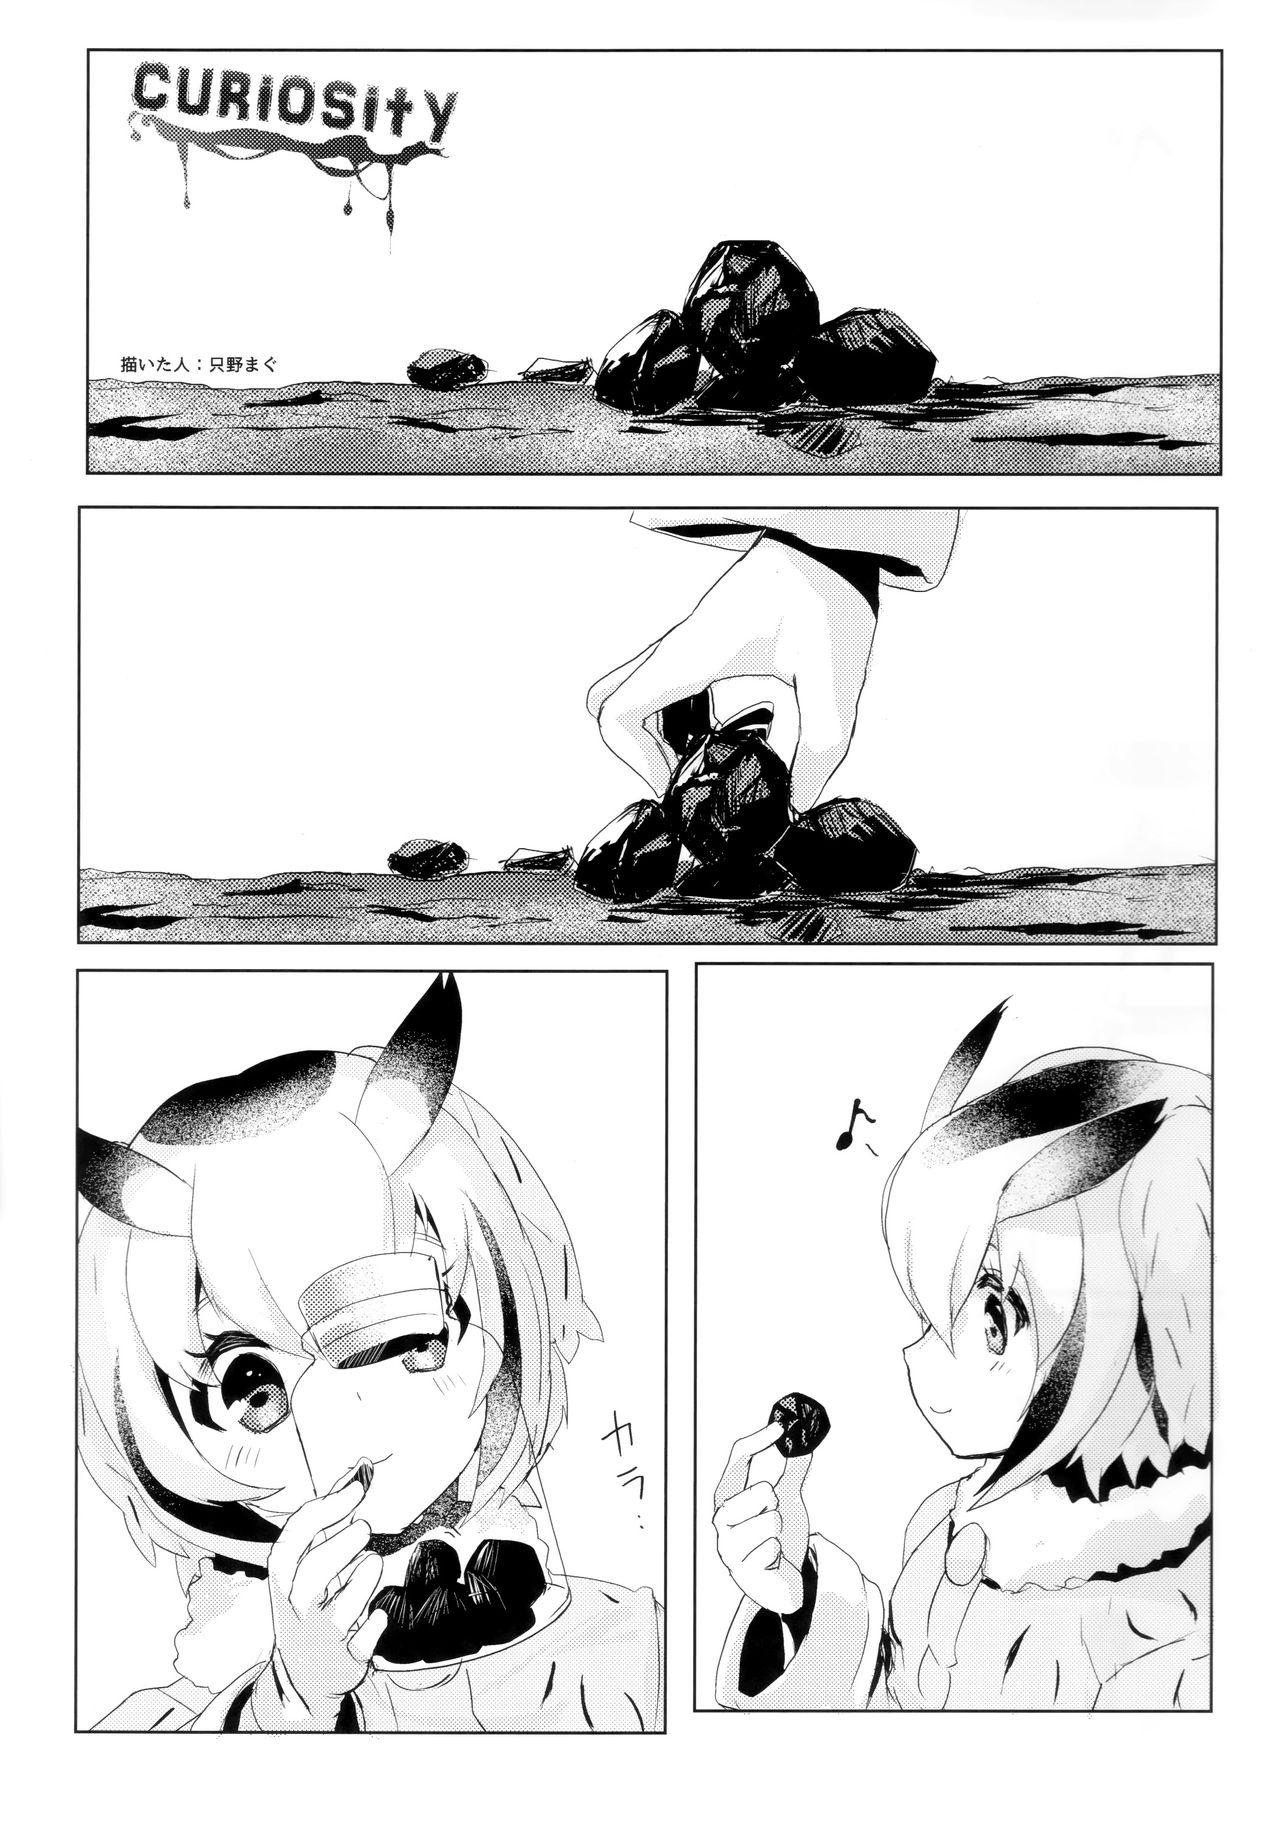 Rimming CURIOSITY - Kemono friends Fucked - Page 2